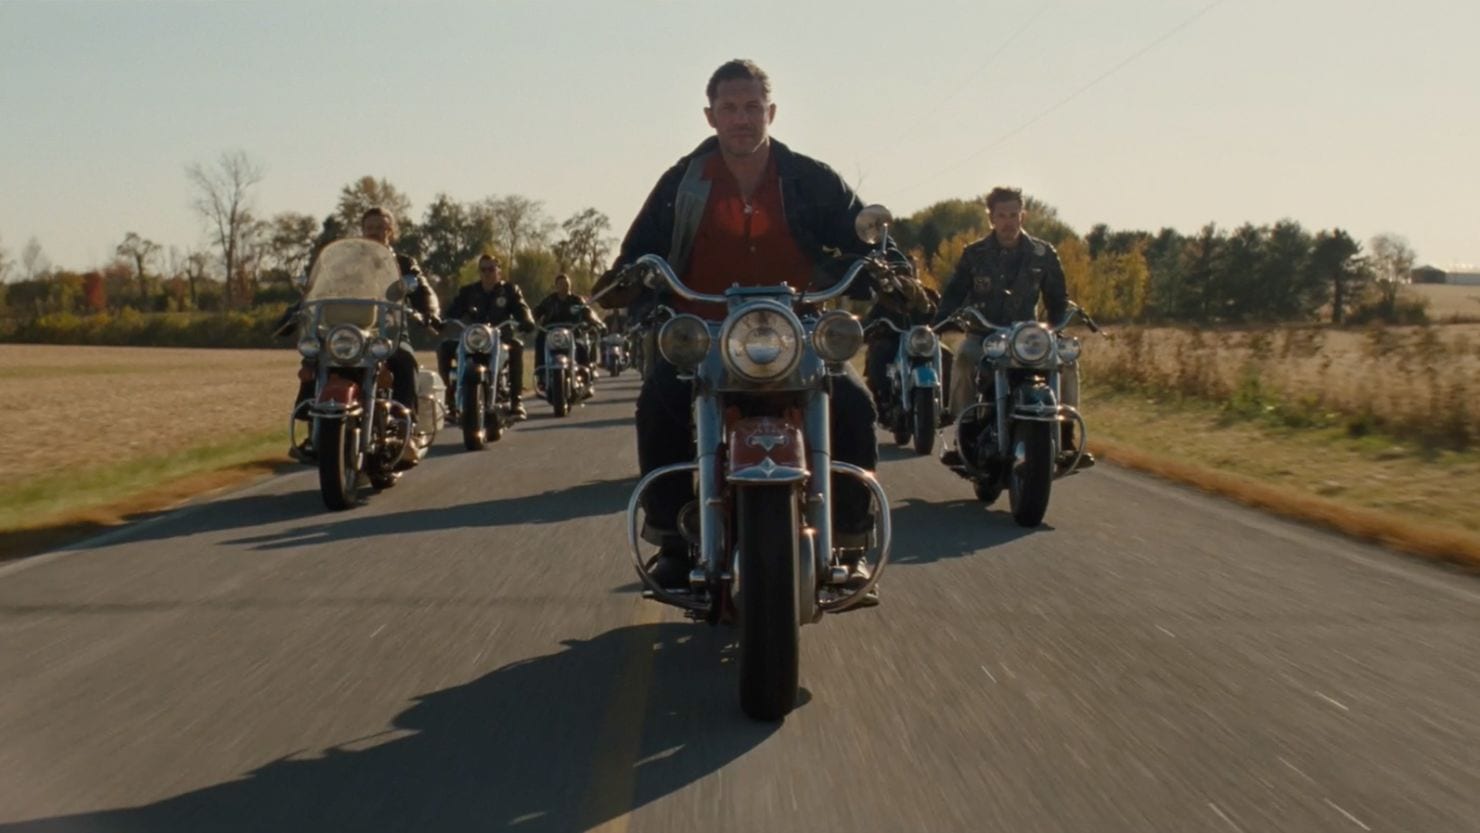 Journey Back to the Rebellious 60s with The Bikeriders and Its Star-Studded Cast